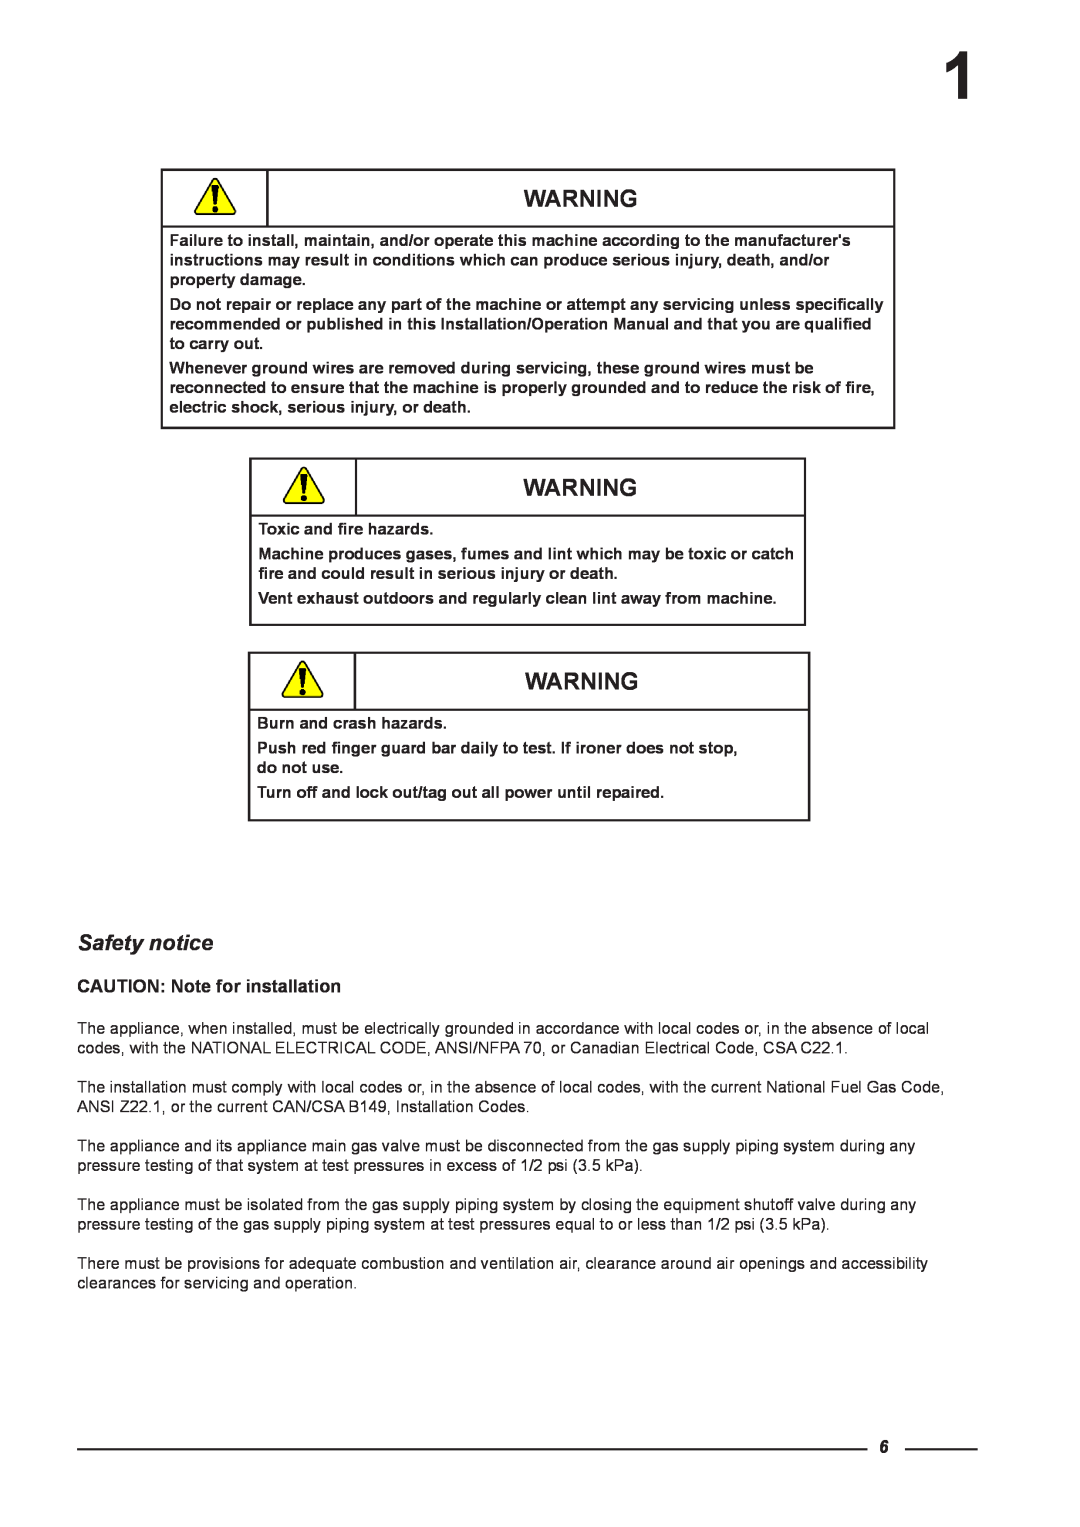 Alliance Laundry Systems CI 1650/325, CI 2050/325 Safety notice, CAUTION Note for installation, Toxic and fire hazards 